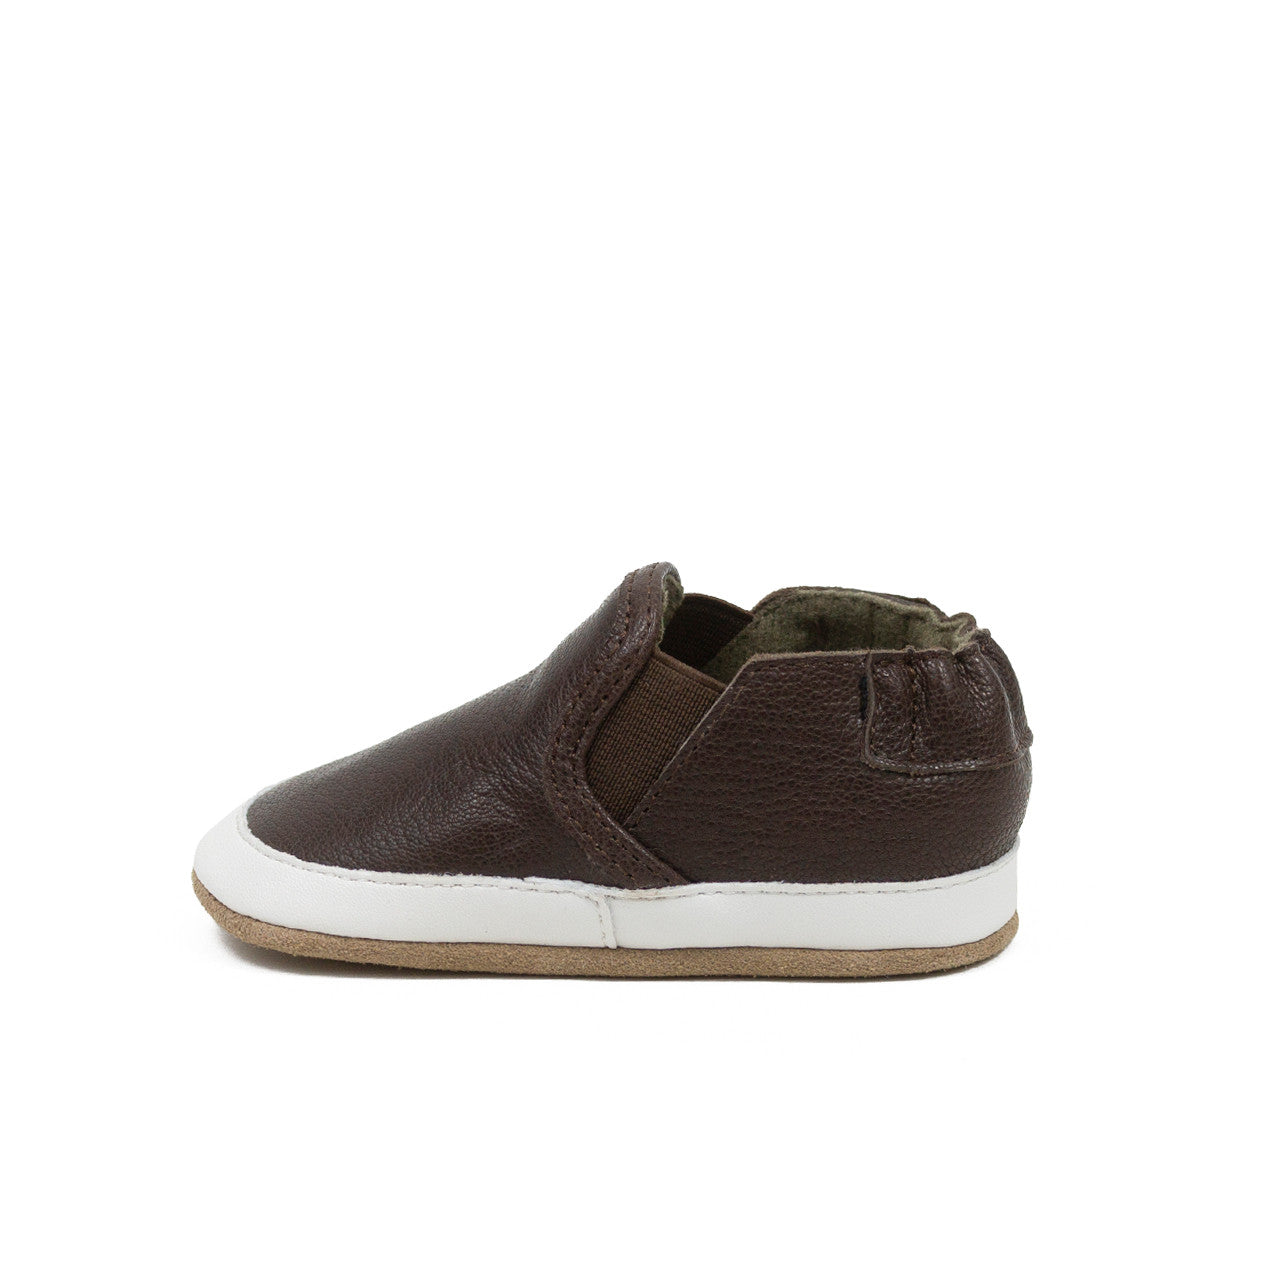 Robeez Shoes - Liam Brown Leather Shoes